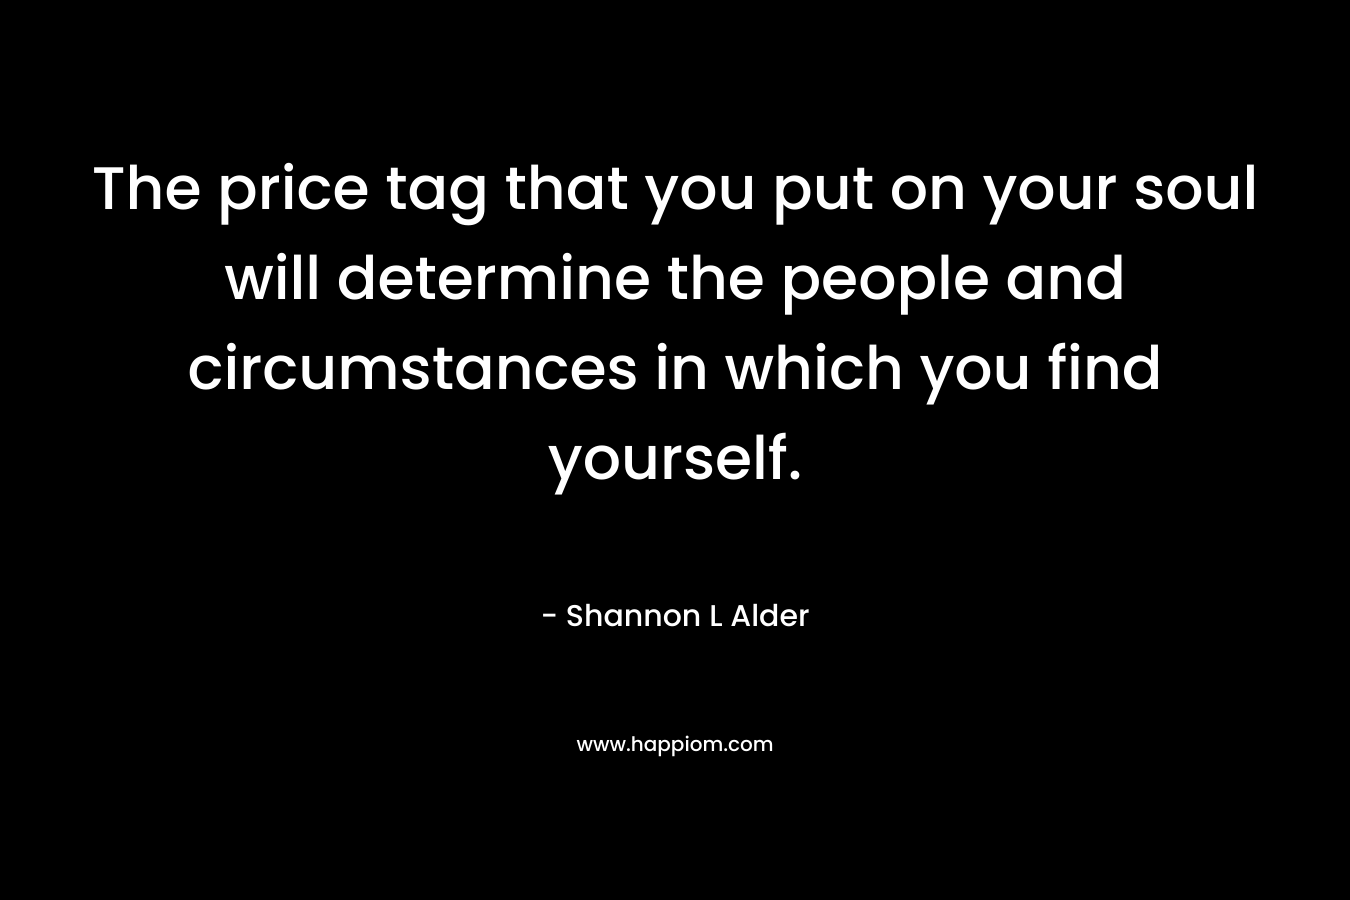 The price tag that you put on your soul will determine the people and circumstances in which you find yourself. – Shannon L Alder